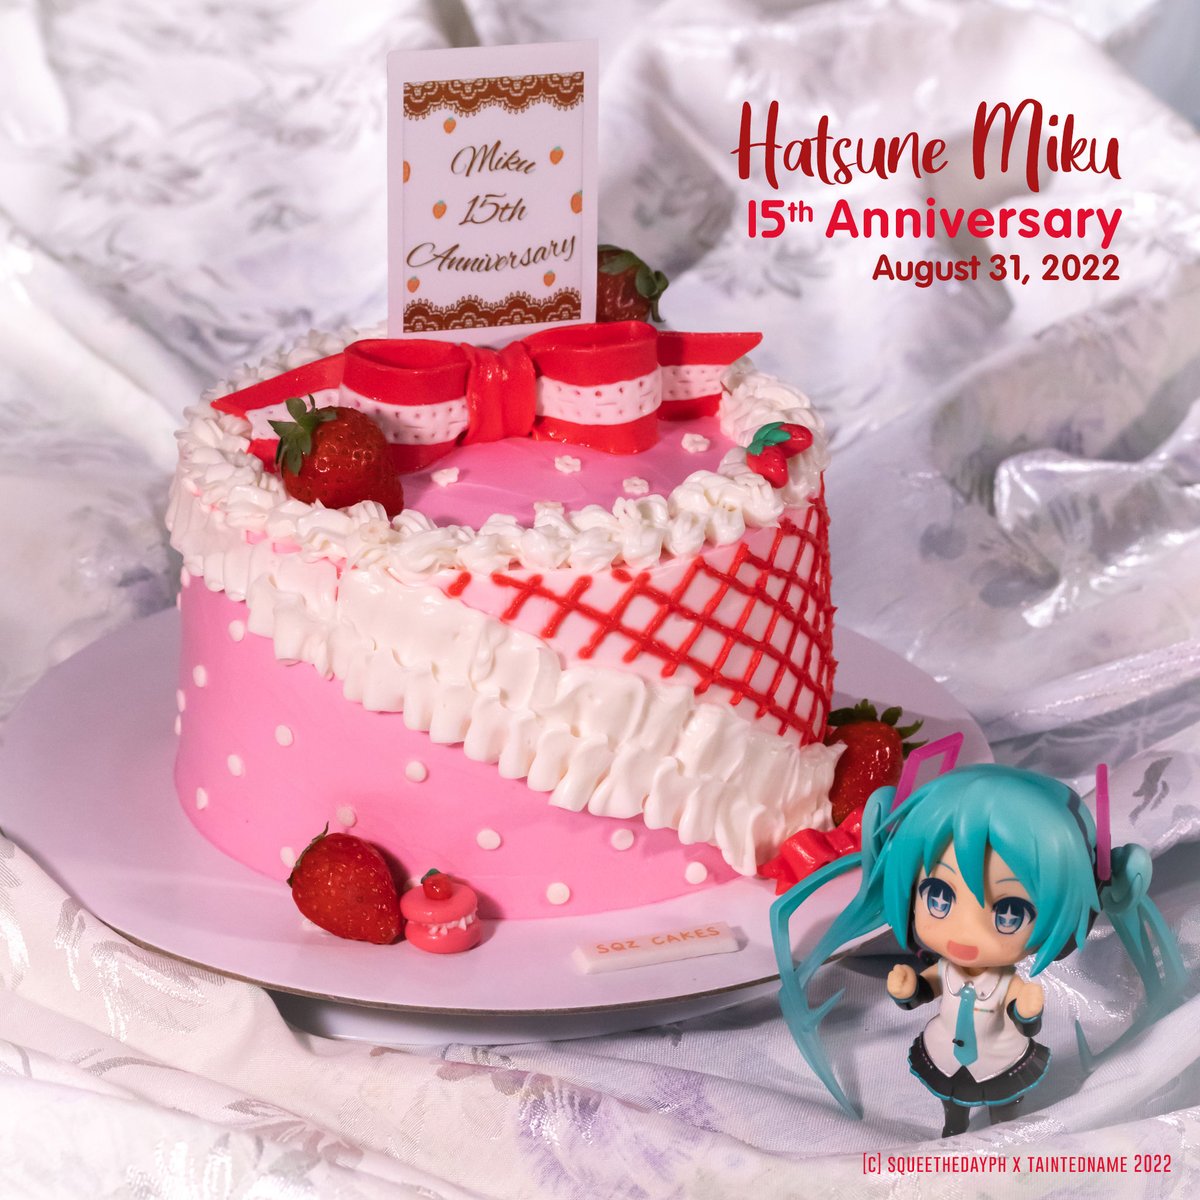 15 Years of Miku. You got a proper cake this time. HBD!
#初音ミク生誕祭2022
#初音ミク誕生祭2022 
#初音ミク15周年
#初音ミク